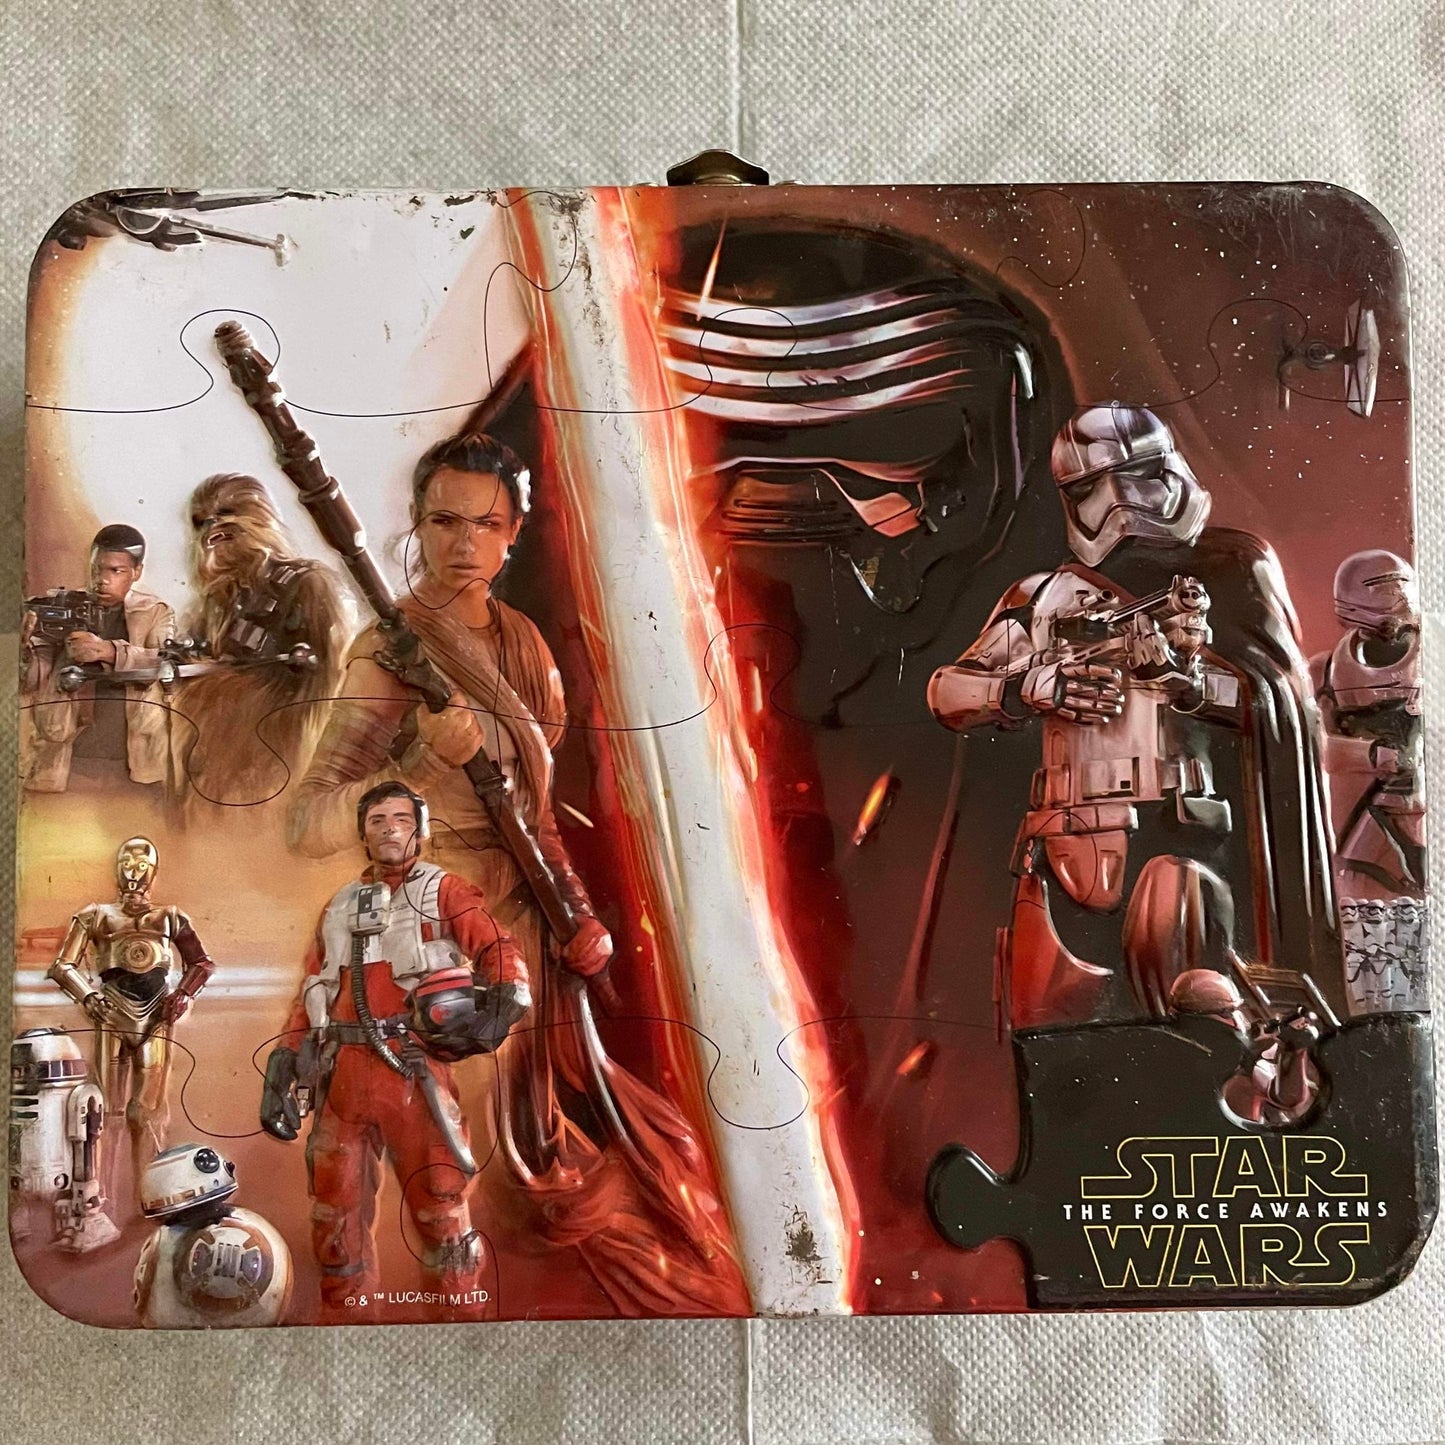 Star Wars The Force Awakens Embossed Metal Lunch Box